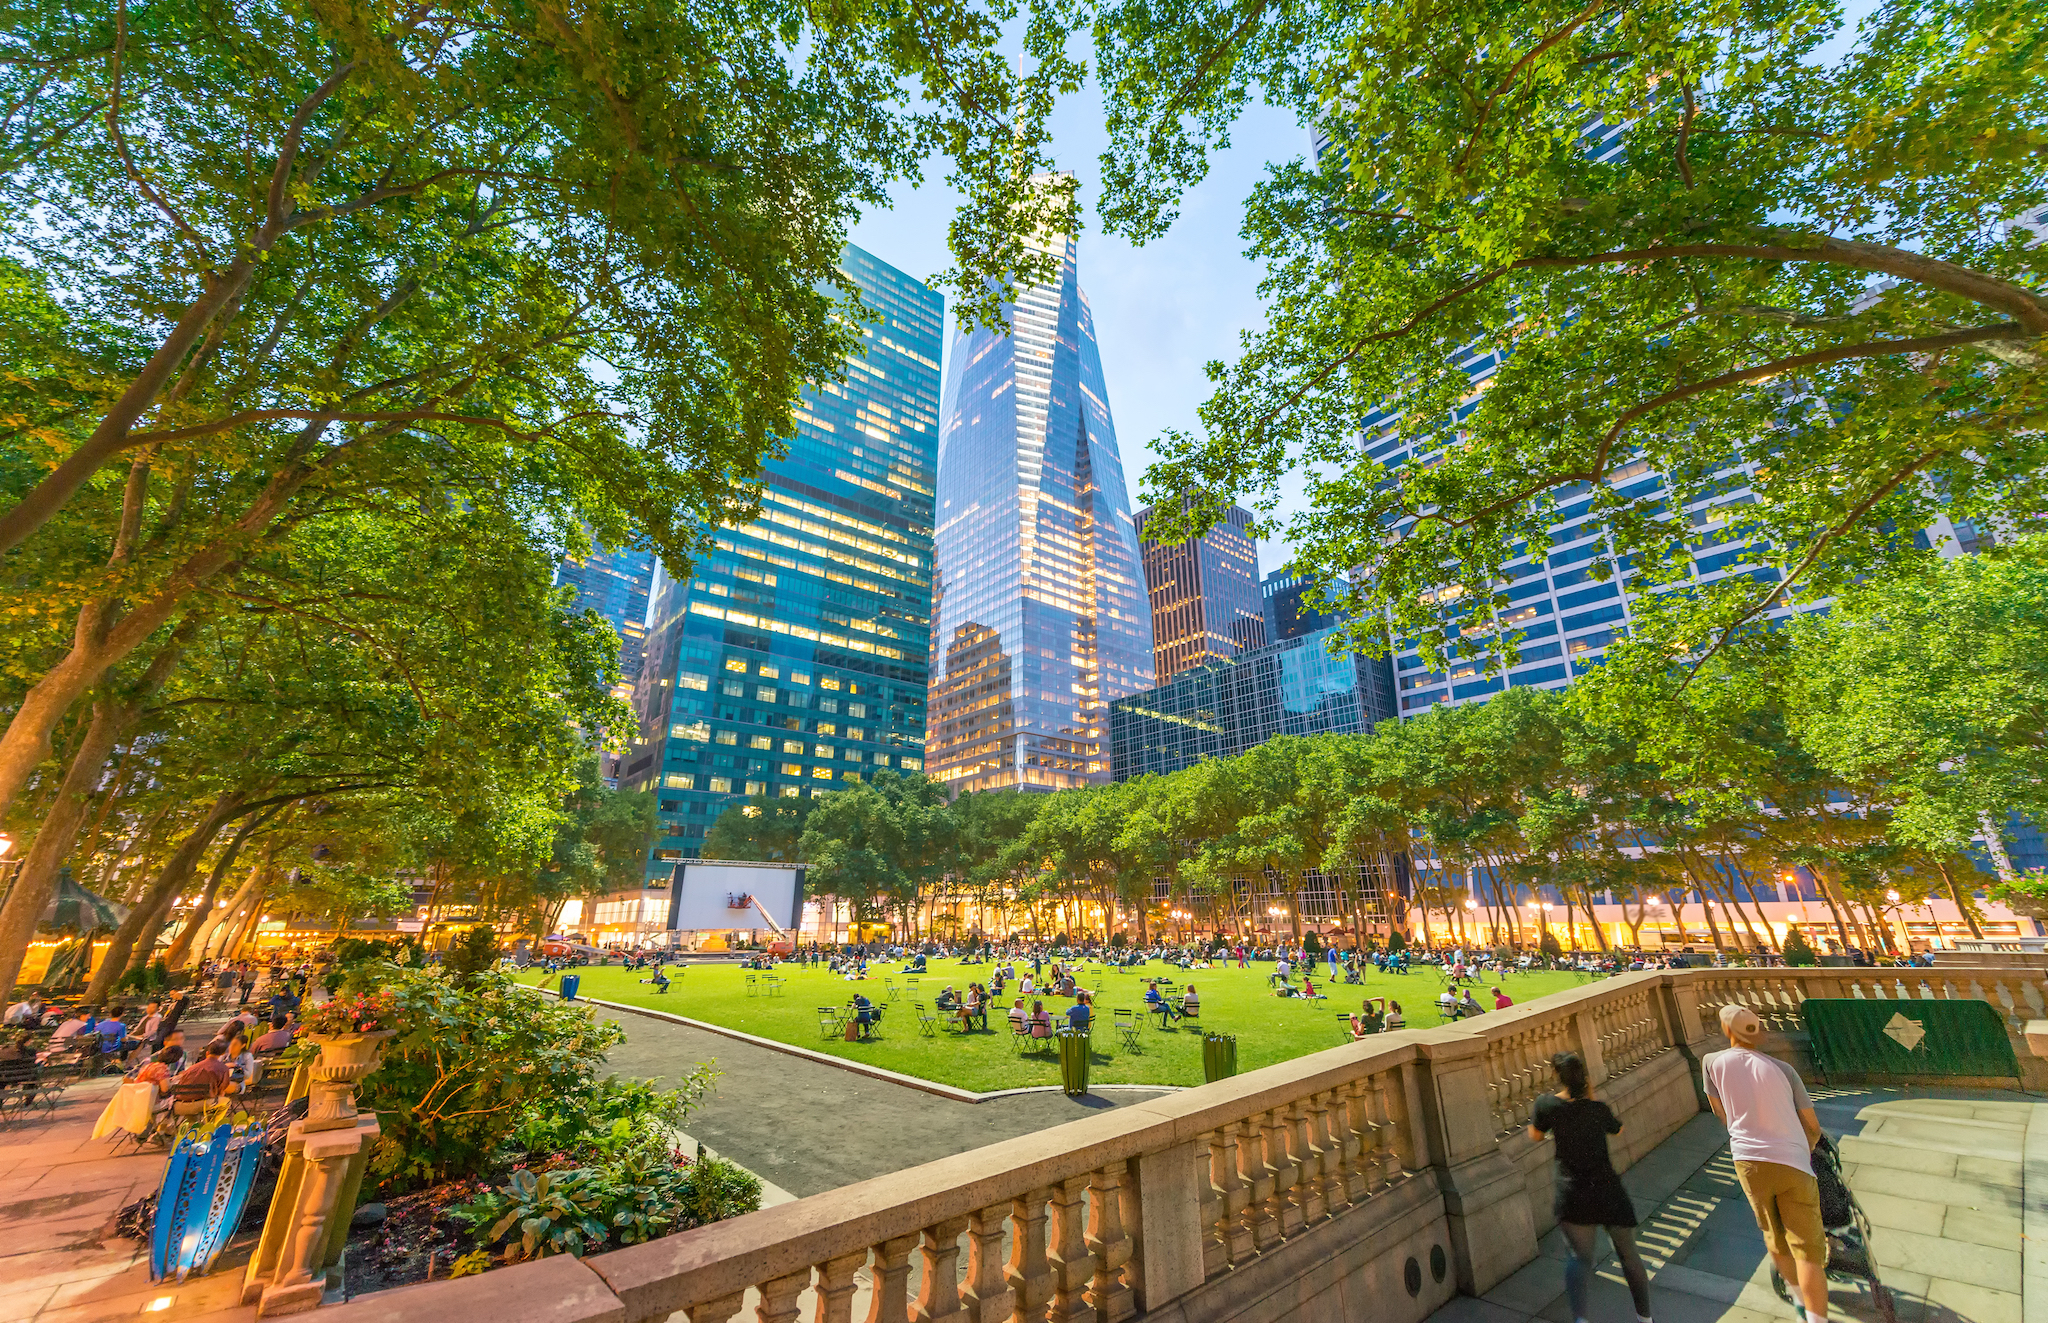 See free Broadway performances in Bryant Park starting this July